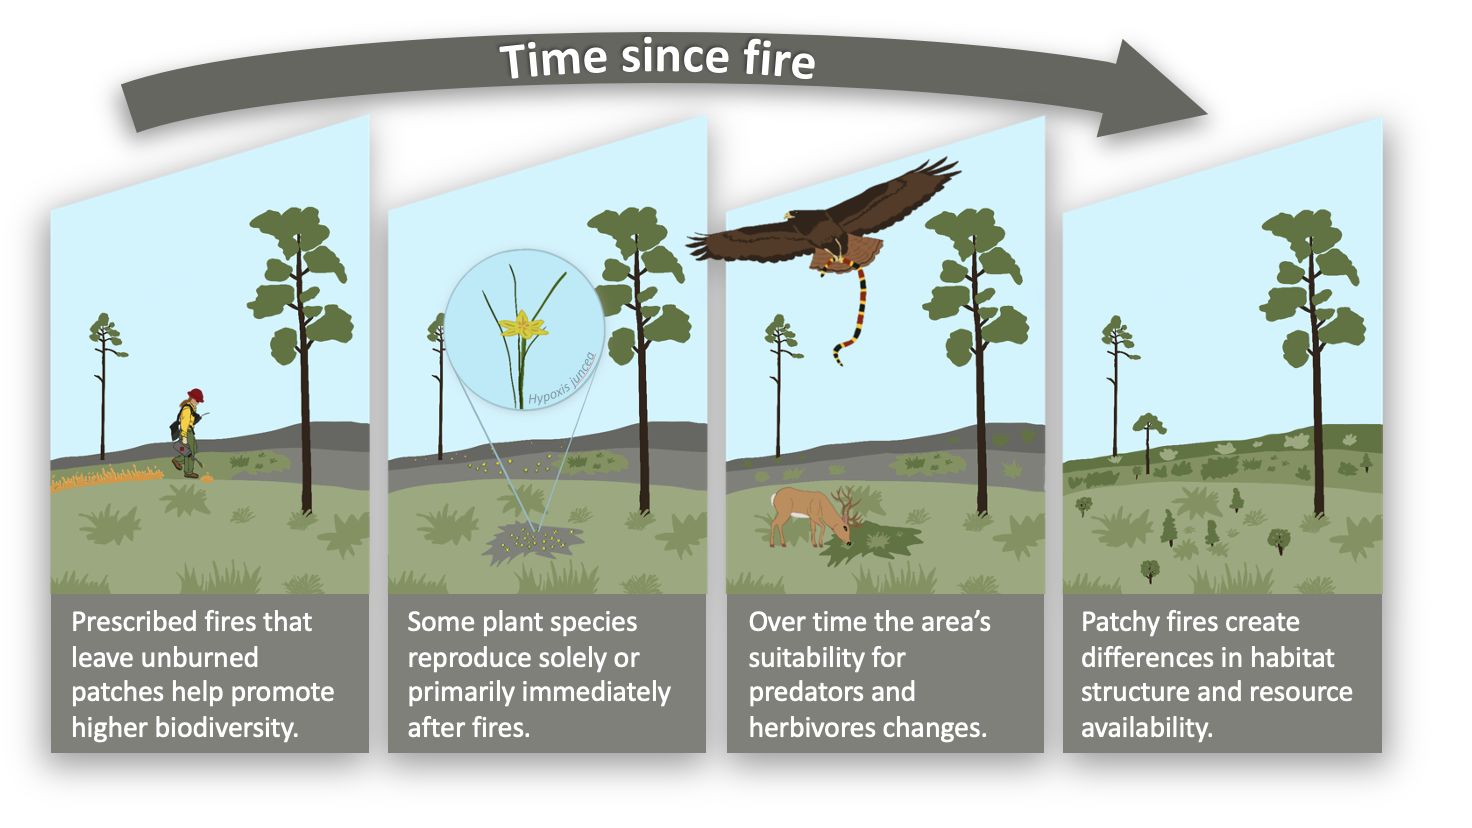 Overview of the effects of spatial variation of fire on plants and animals. 